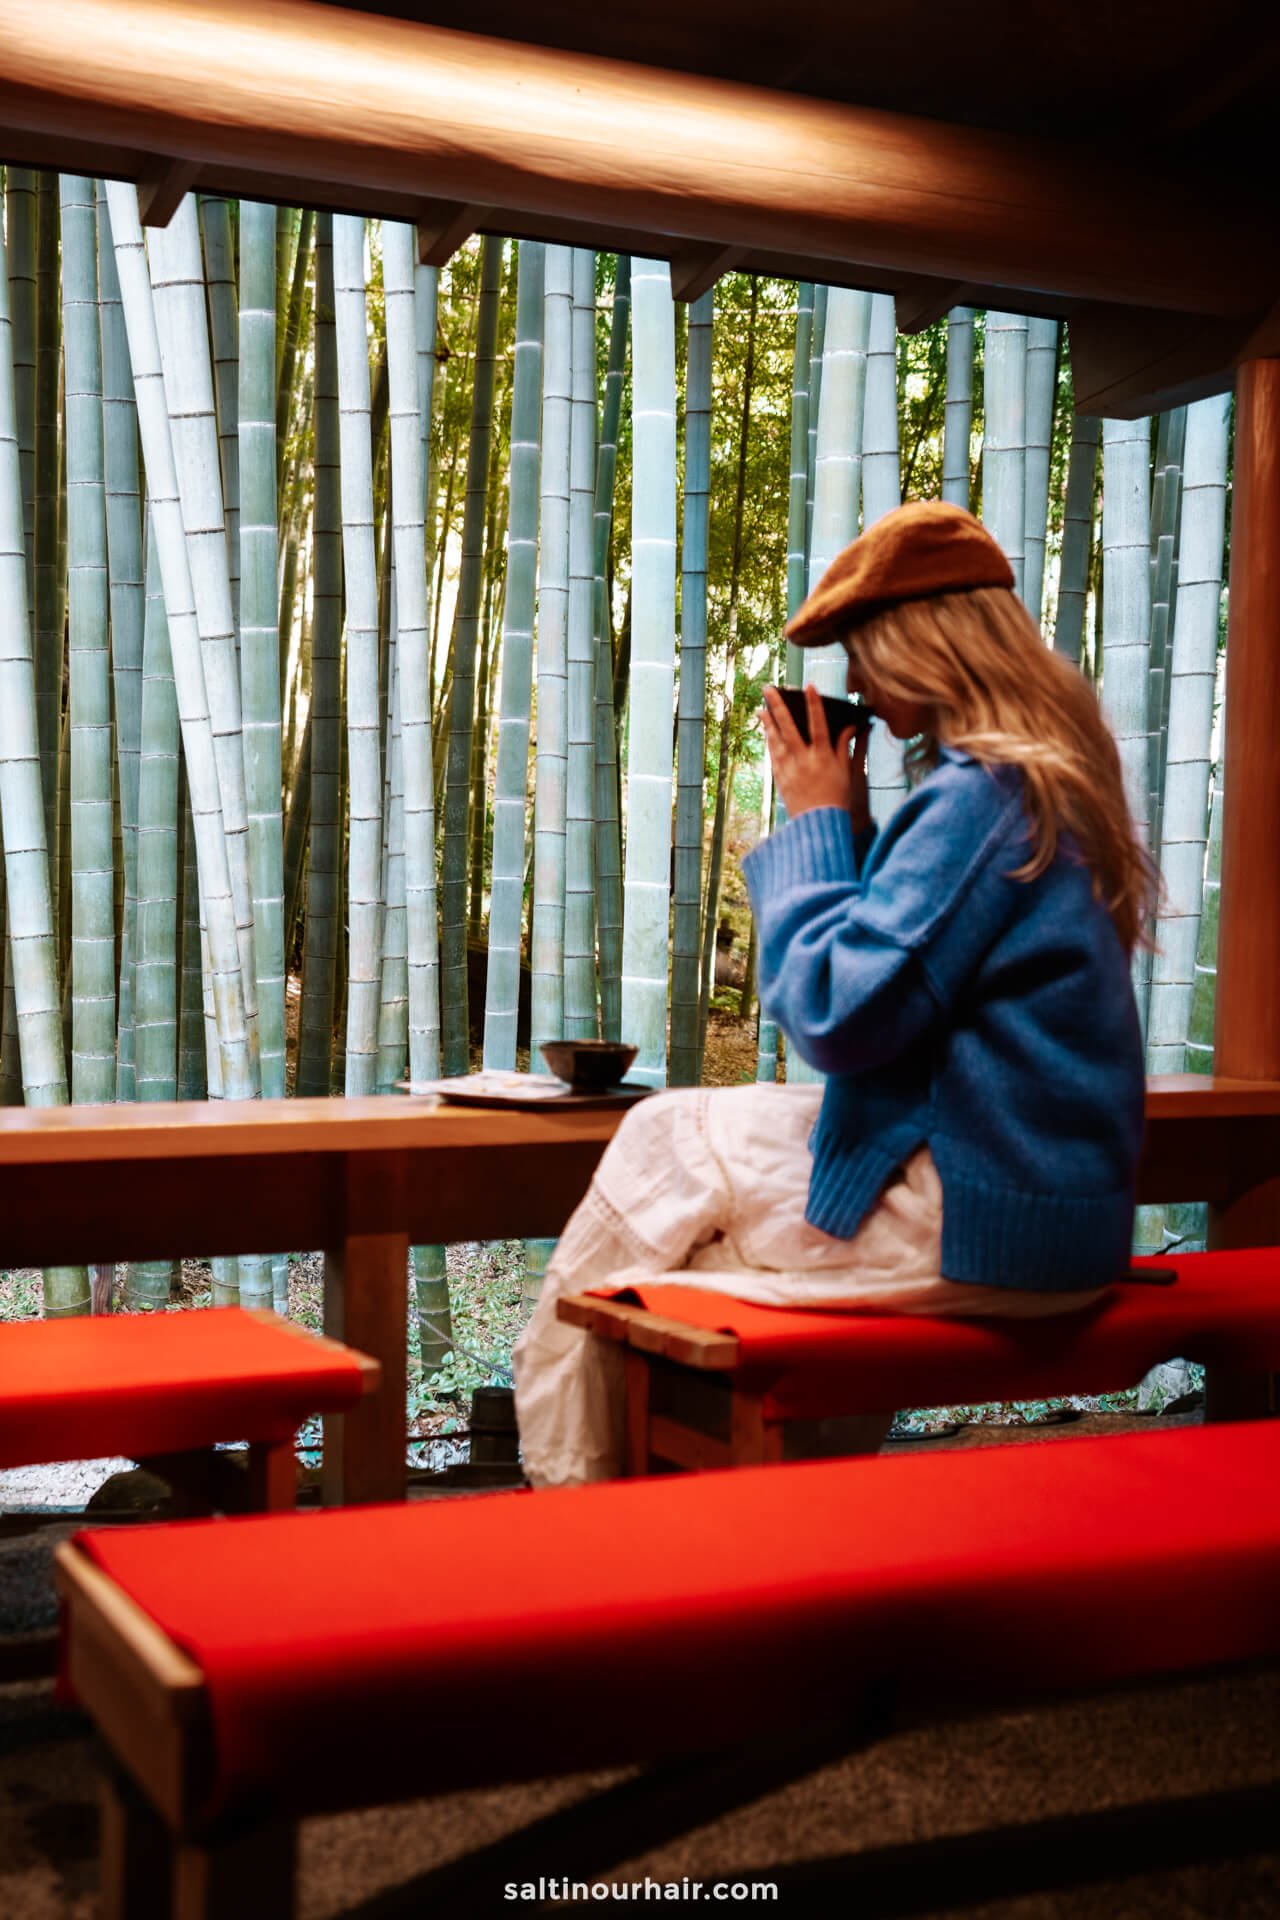 matcha cafe japan in bamboo forest